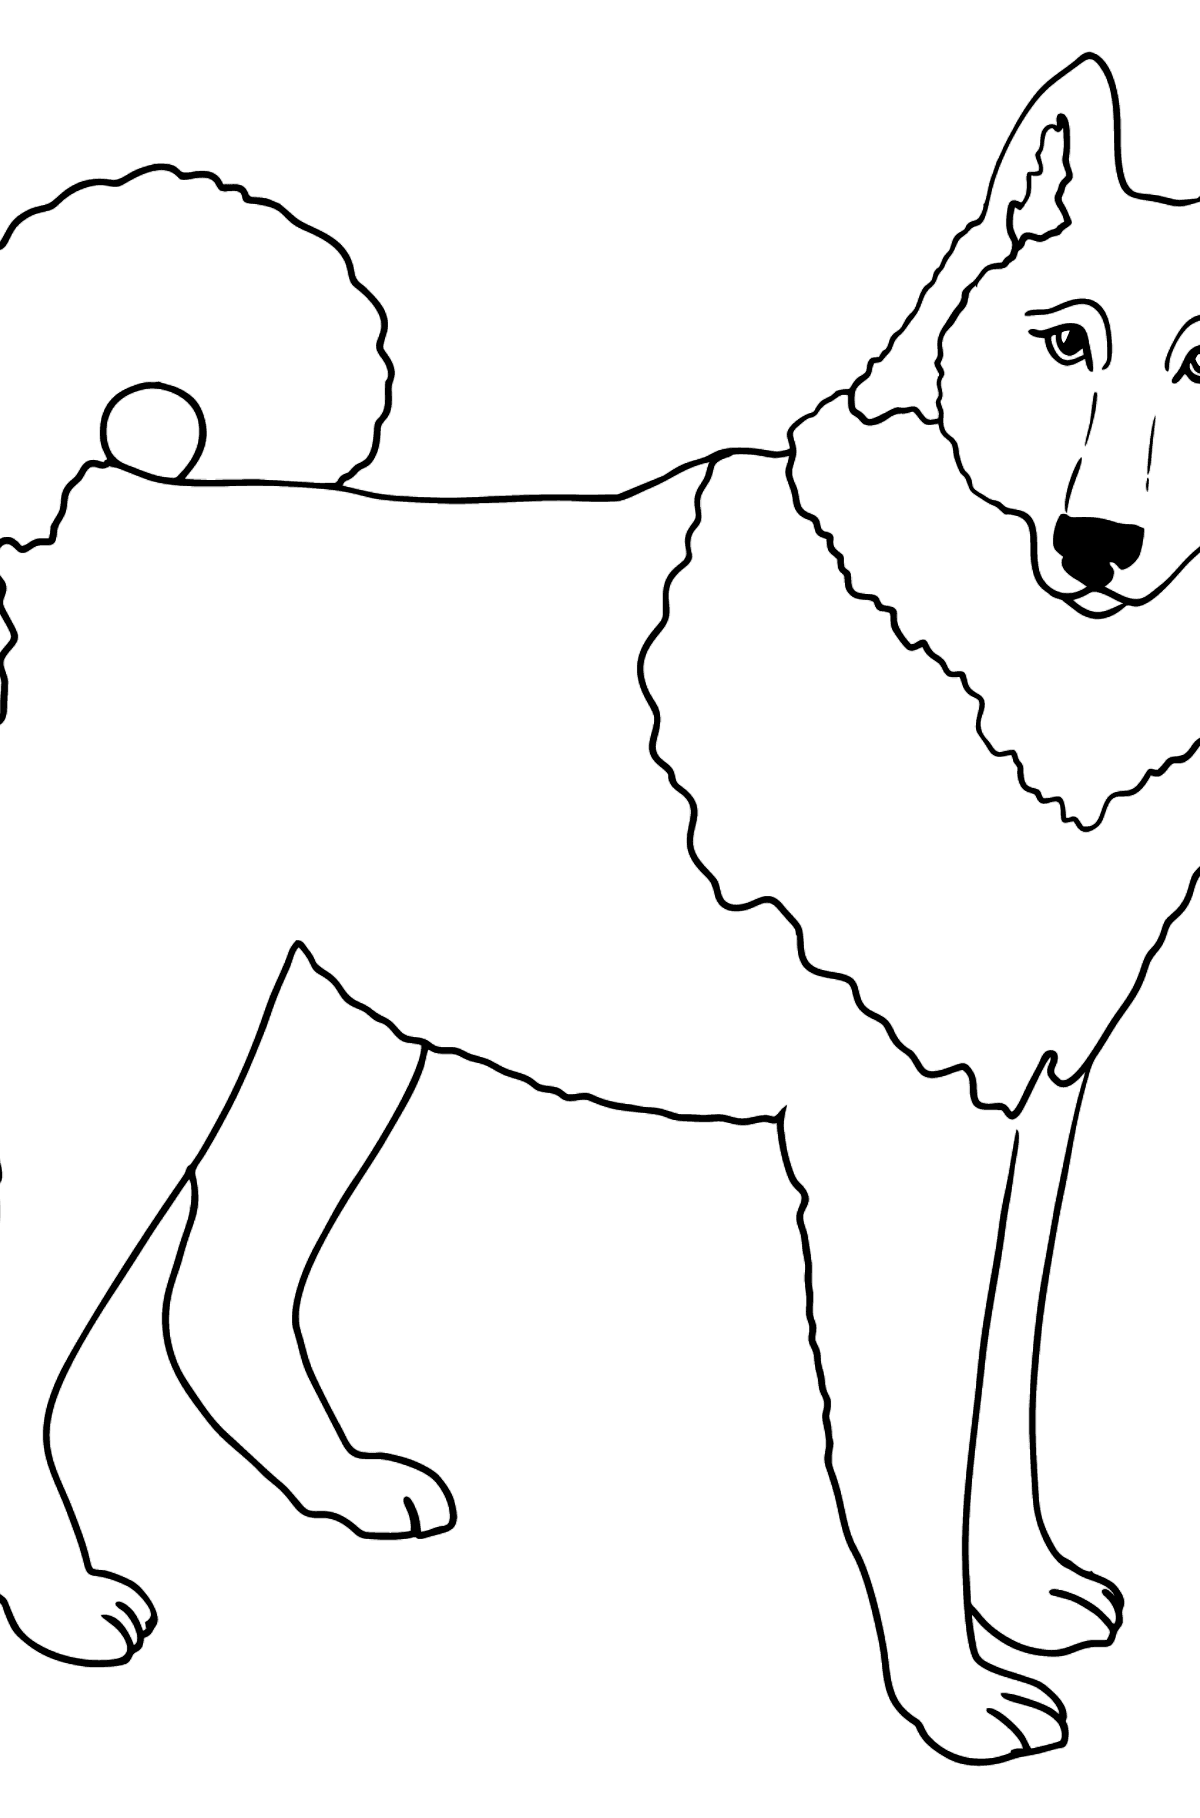 Siberian Husky coloring page - Coloring Pages for Kids